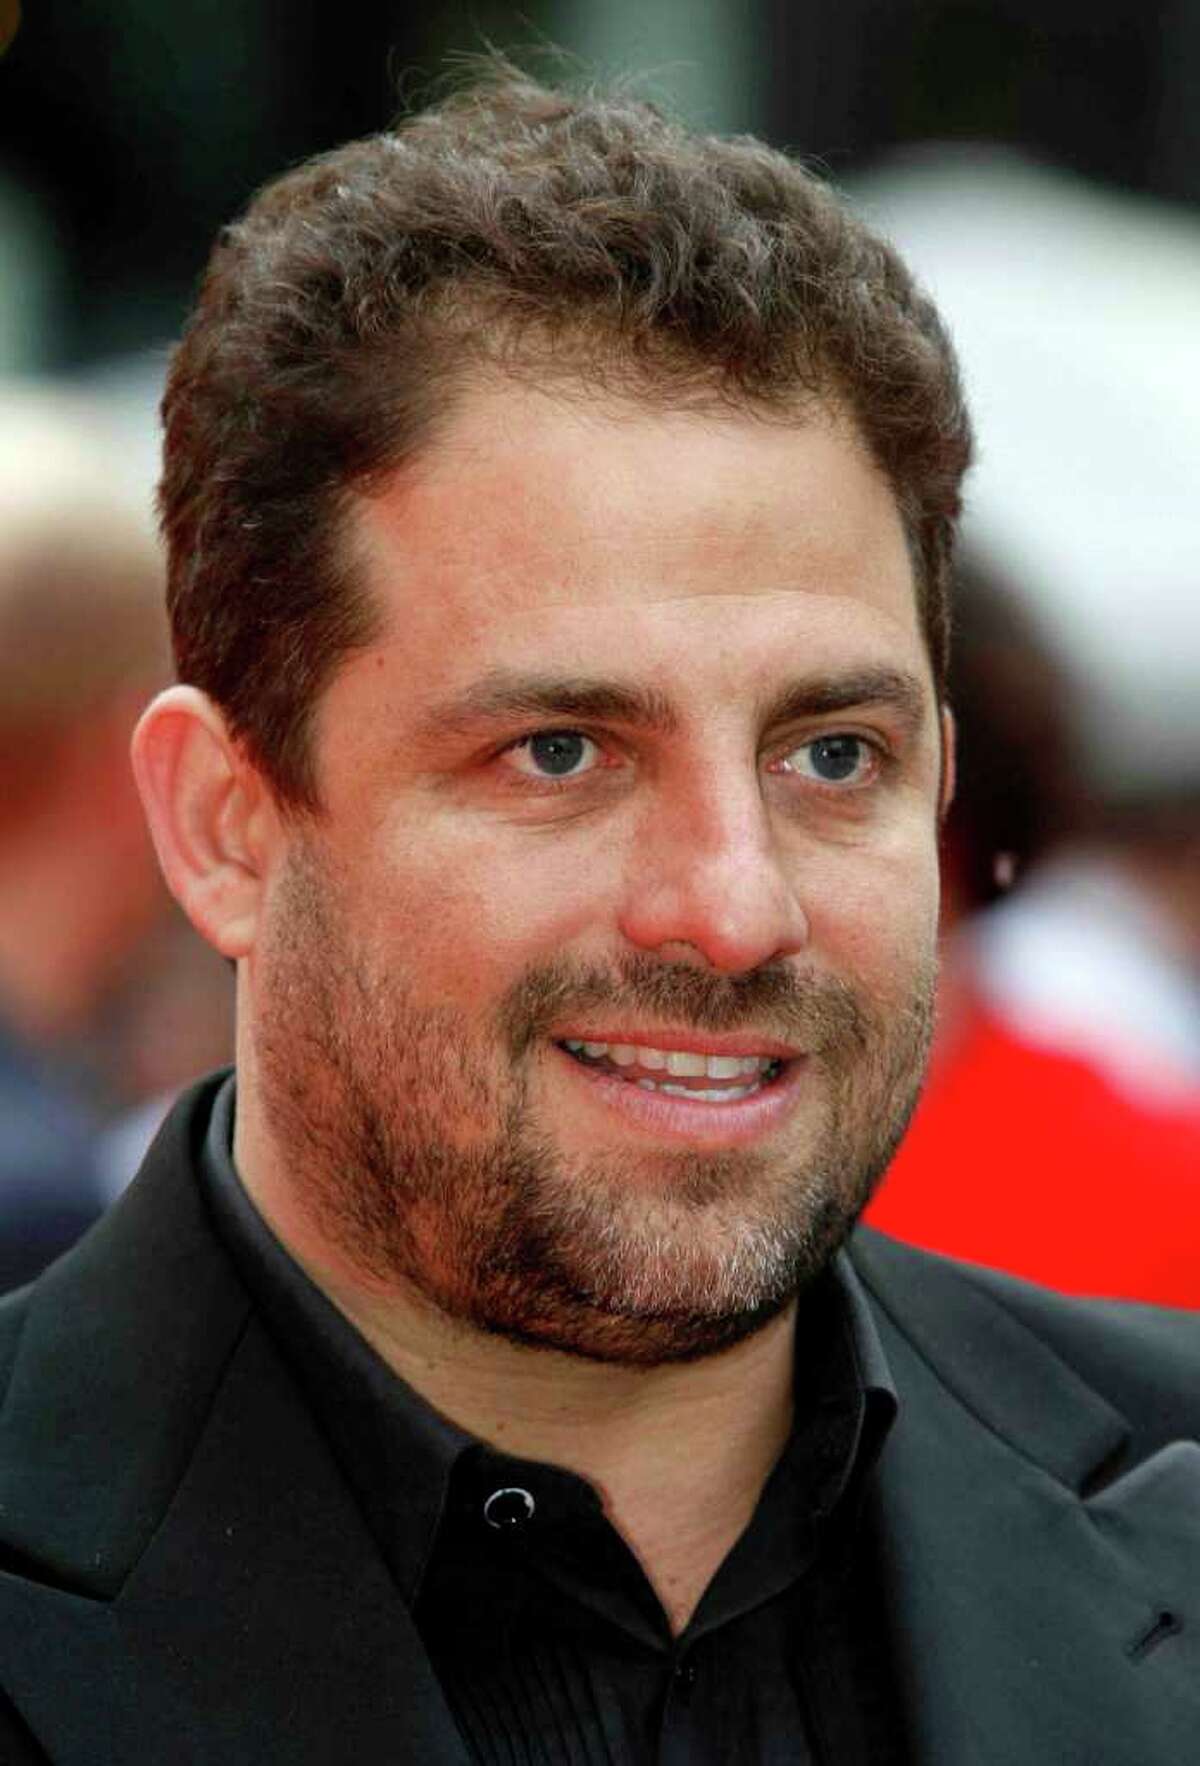 FILE - In this May 18, 2010 file photo, Brett Ratner poses for the photographers as he arrives for the European film premiere of the film 'Kites', in London, Tuesday, May 18, 2010. Ratner and Don Mischer will produce the 84th Academy Awards telecast, Academy of Motion Picture Arts and Sciences President Tom Sherak announced Thursday, Aug. 4, 2011. (AP Photo/Lefteris Pitarakis, File)